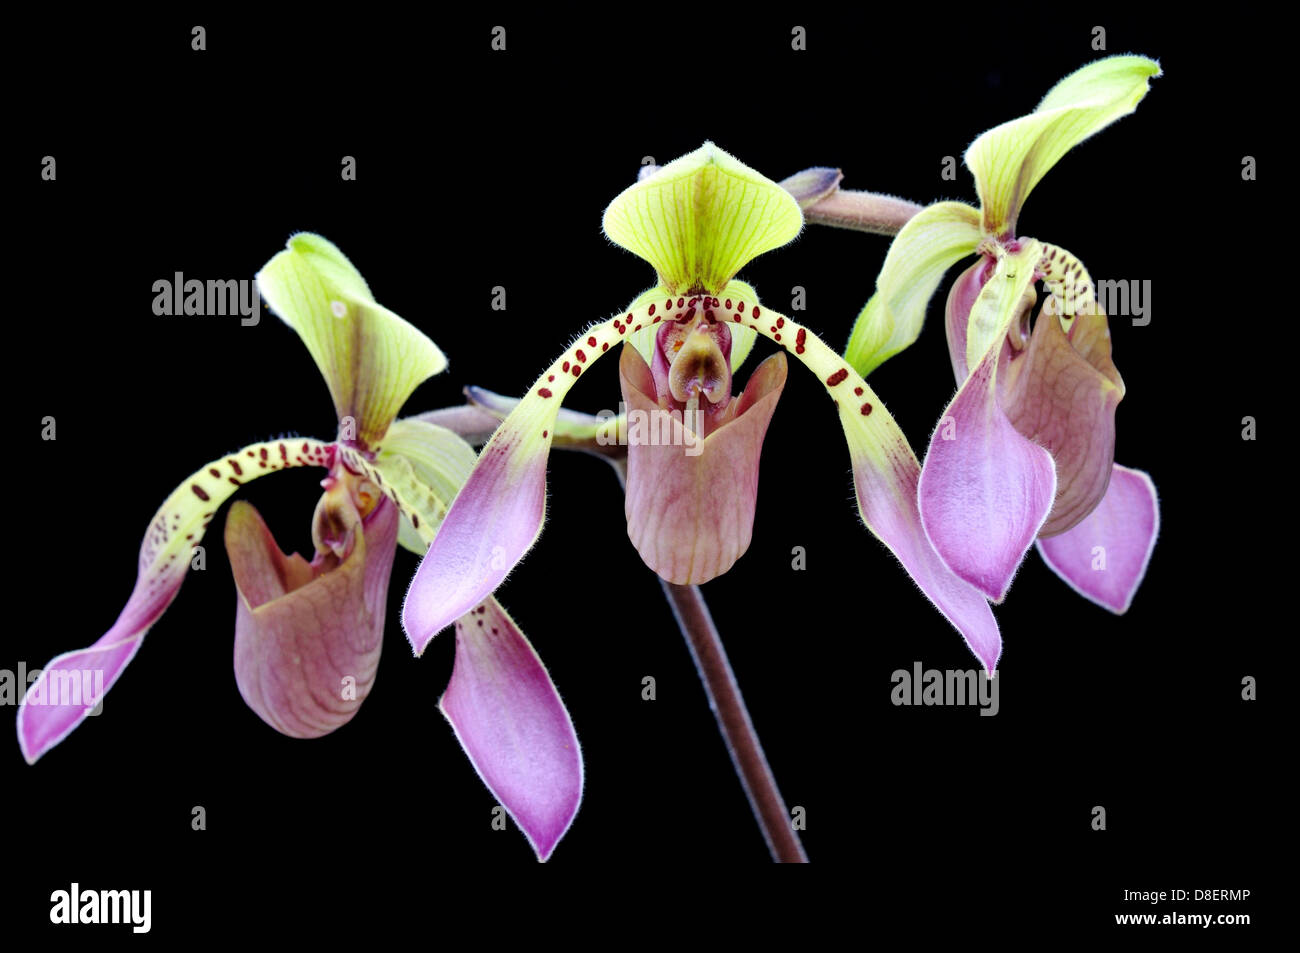 Lady's slipper orchid flowers Paphiopedilum lowii Stock Photo